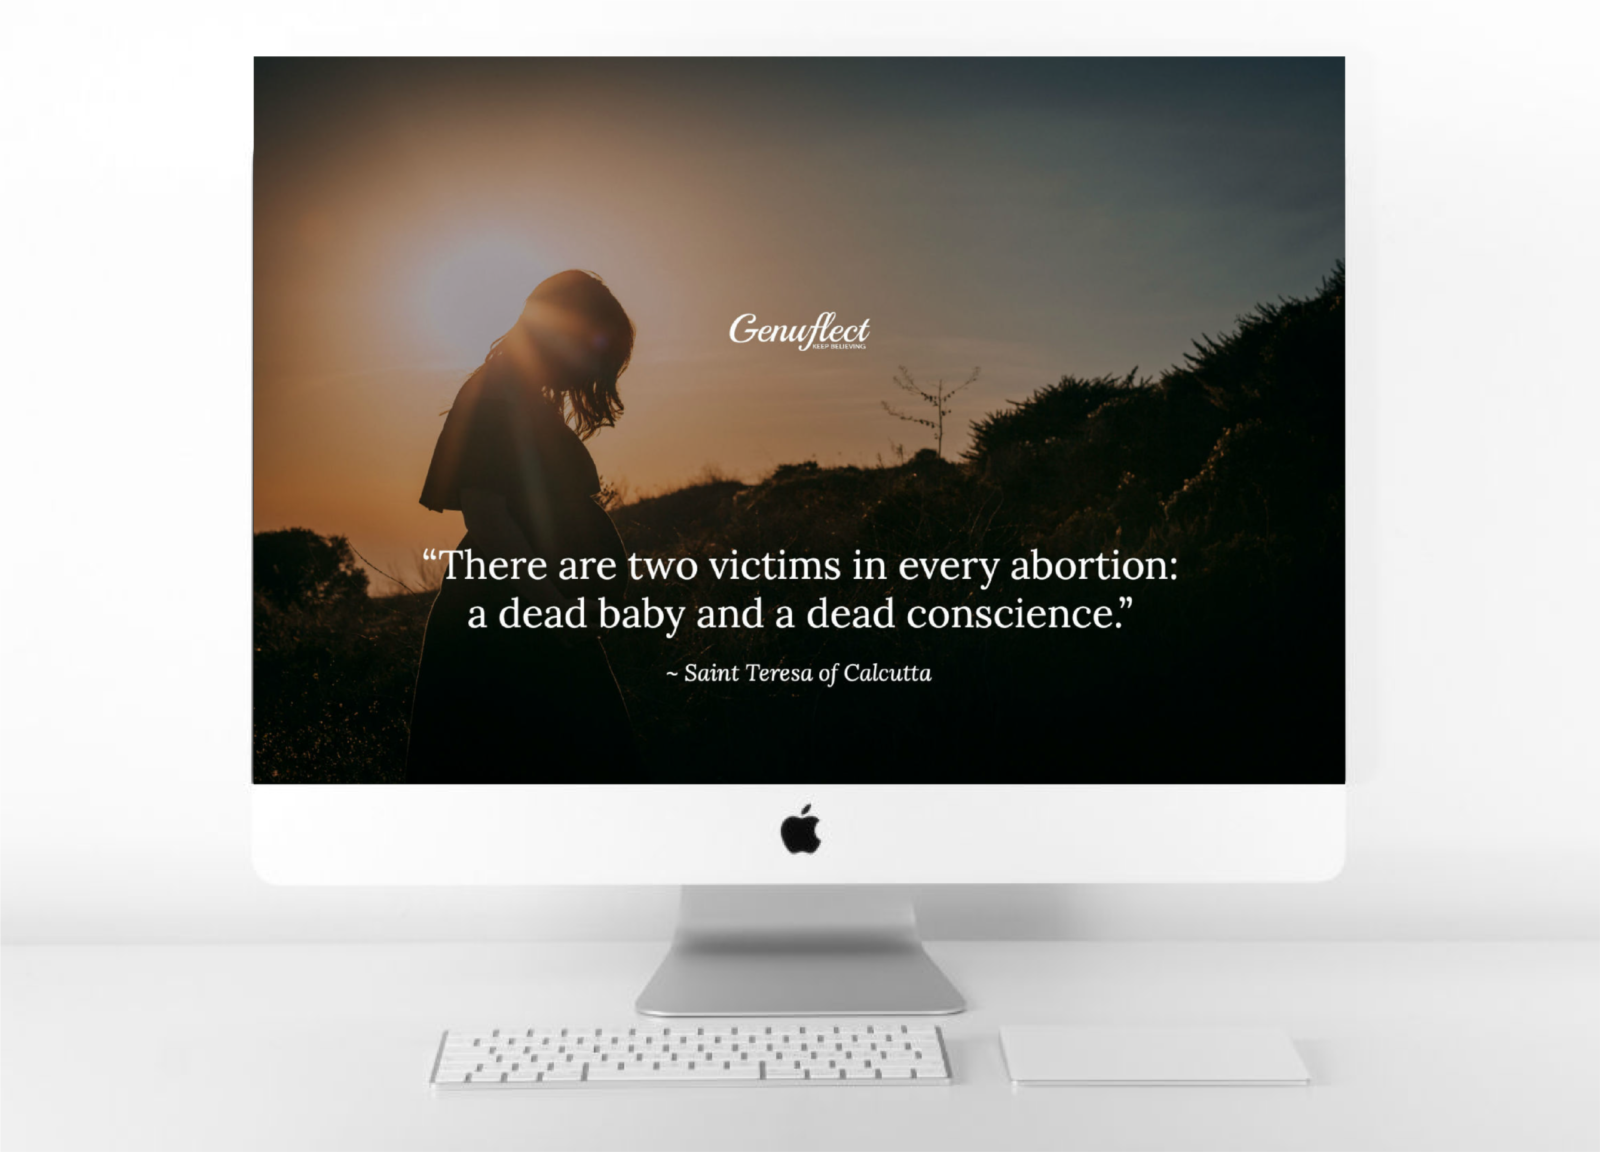 Genuflect.net - Computer background image of pregnant woman silhouette with sun rising in the background